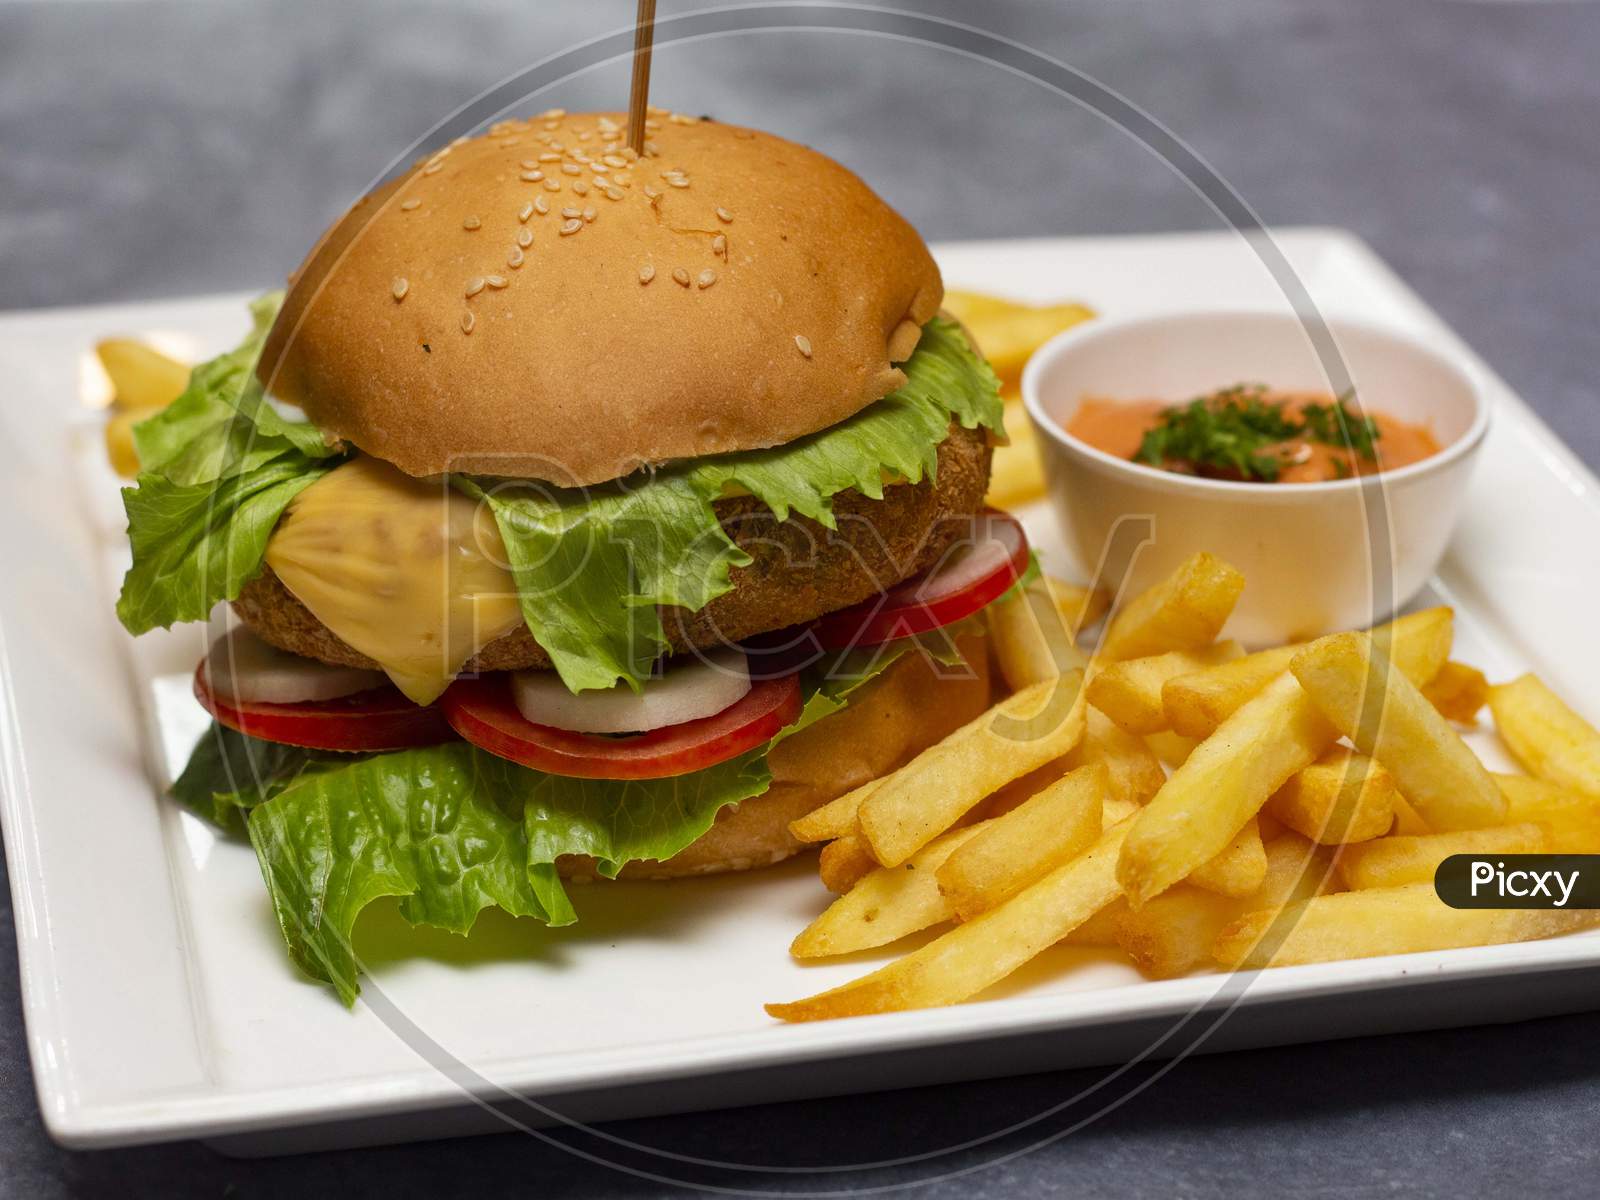 Burger with fresh lettuce, tomato, onion and cheese served with french fries